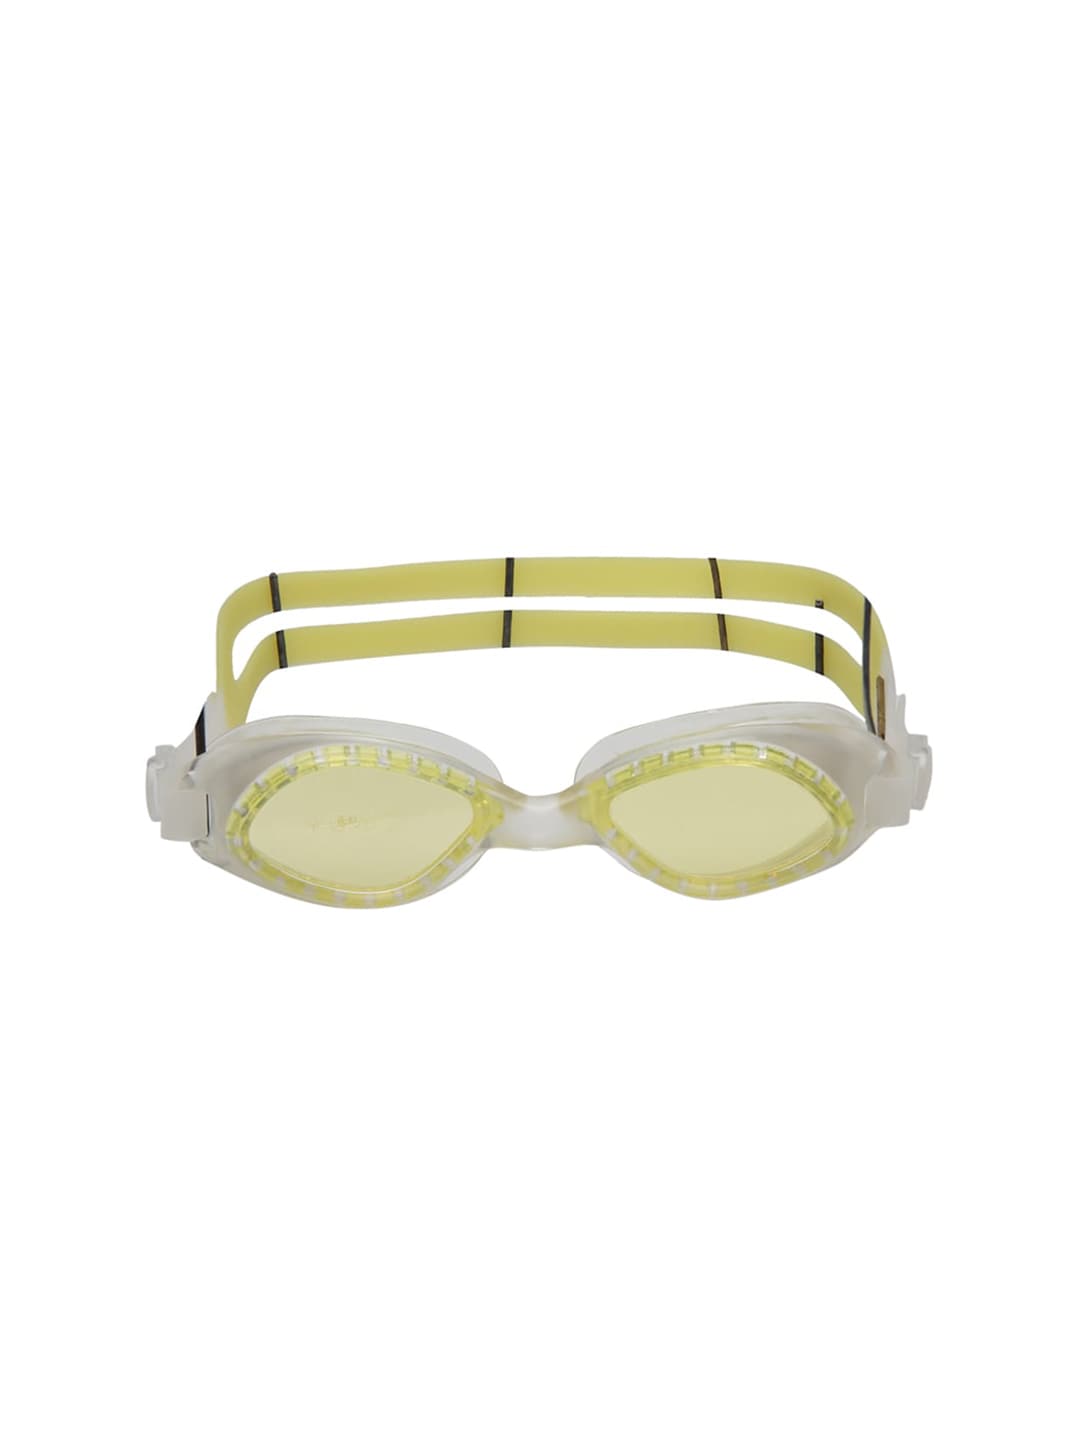 CUKOO Women Yellow Solid Comfort-Fit Swimming Goggles Price in India